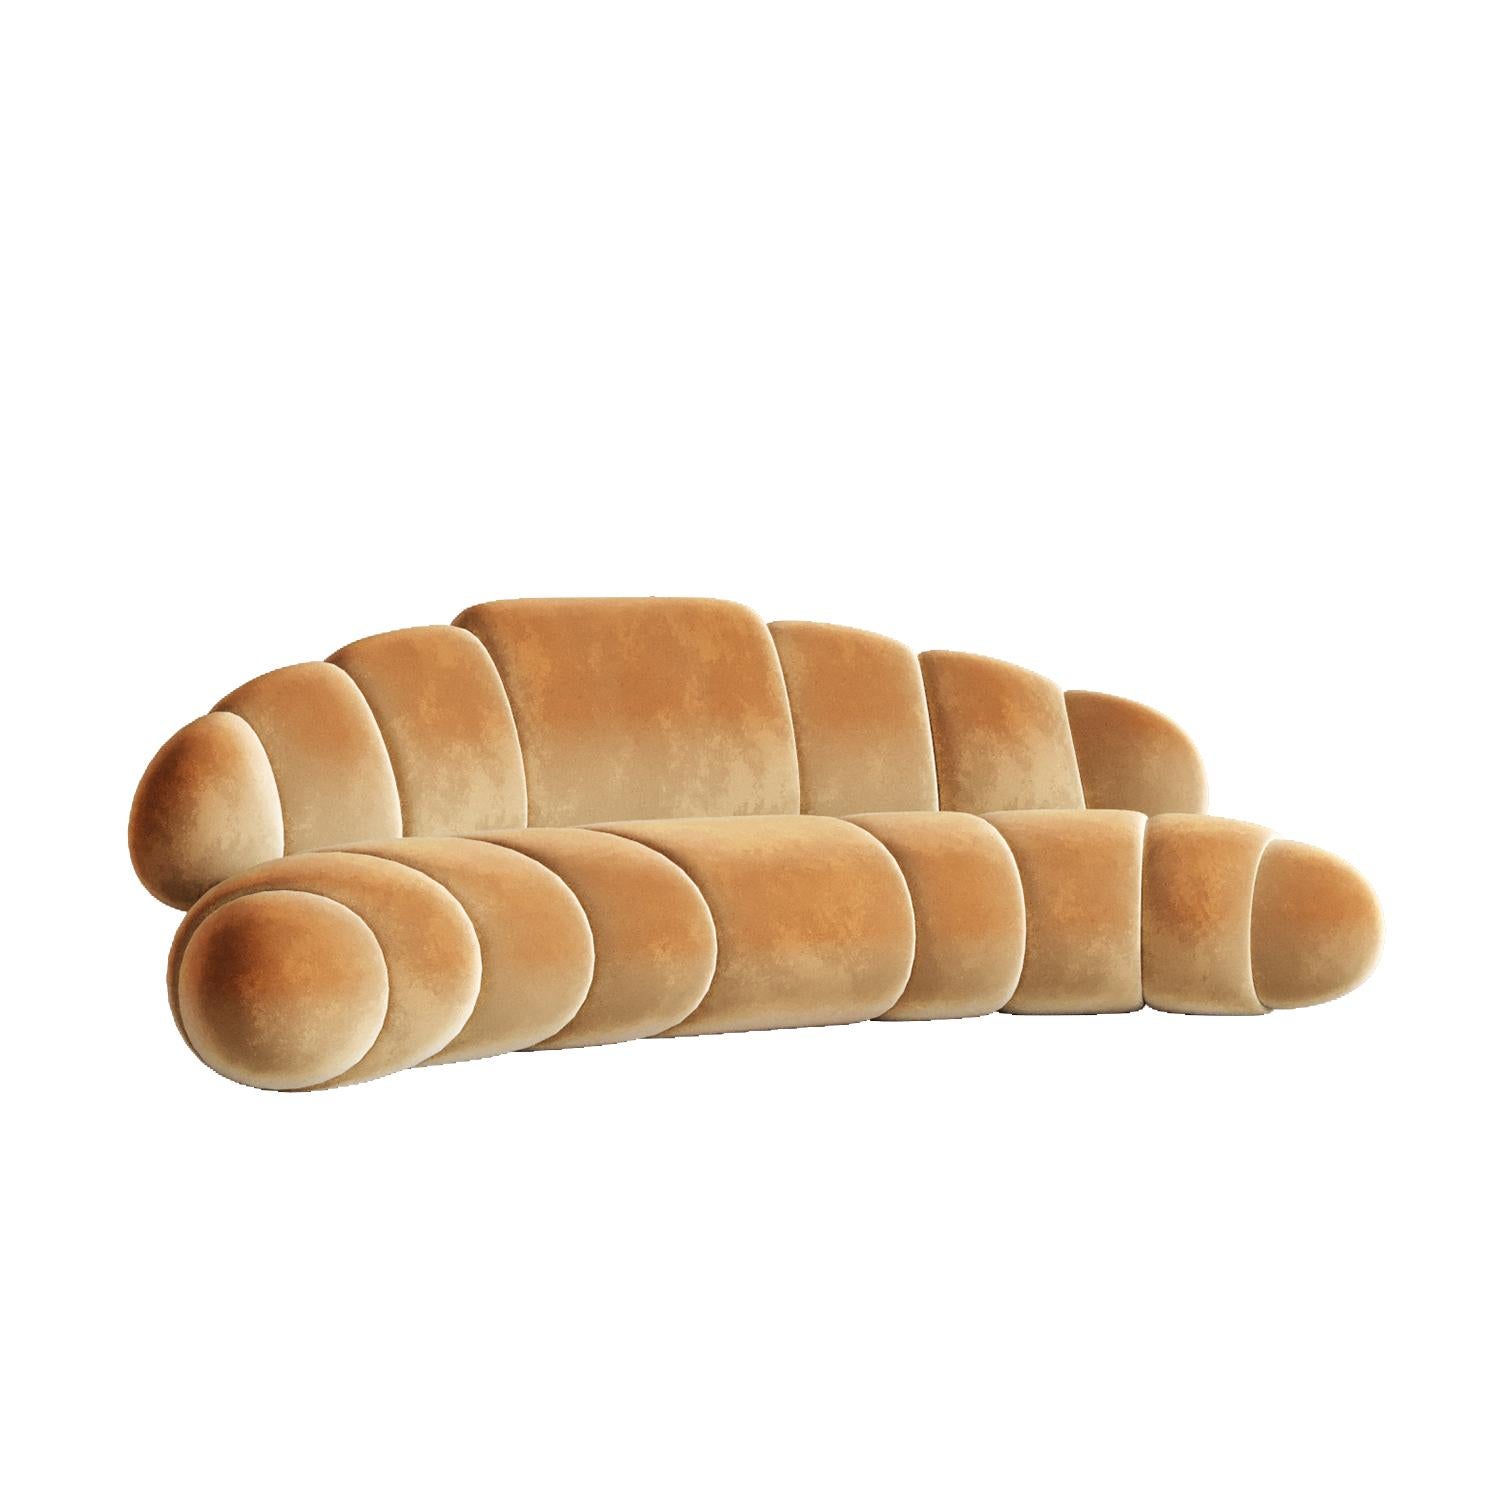 “Croissant” Sofa.

Of course, for the dessert we have all the most delicious and favorite pieces. Collection dedicated to the culture of food, love of food and the most popular dishes in the world. 

Materials: Wood, HR foam, polyester wadding,